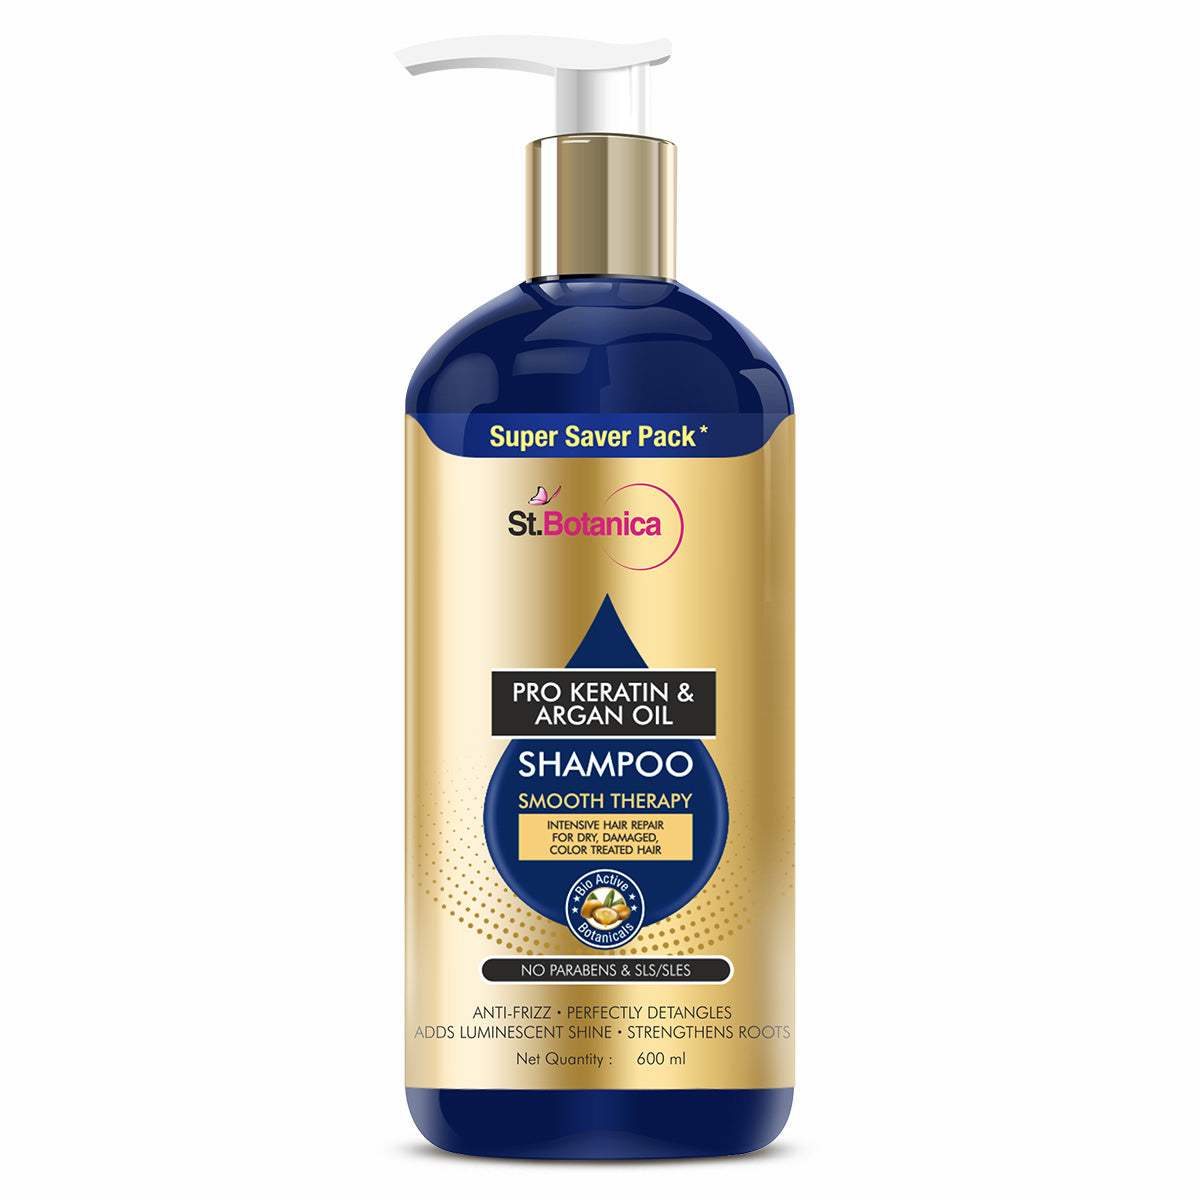 St.Botanica Pro Keratin & Argan Oil Smooth Therapy Shampoo 600ml infused with Pro Keratin & Argan Oil that Smoothens and Hydrates Frizzy Hair | Cruelty Free & Vegan | Paraben Free